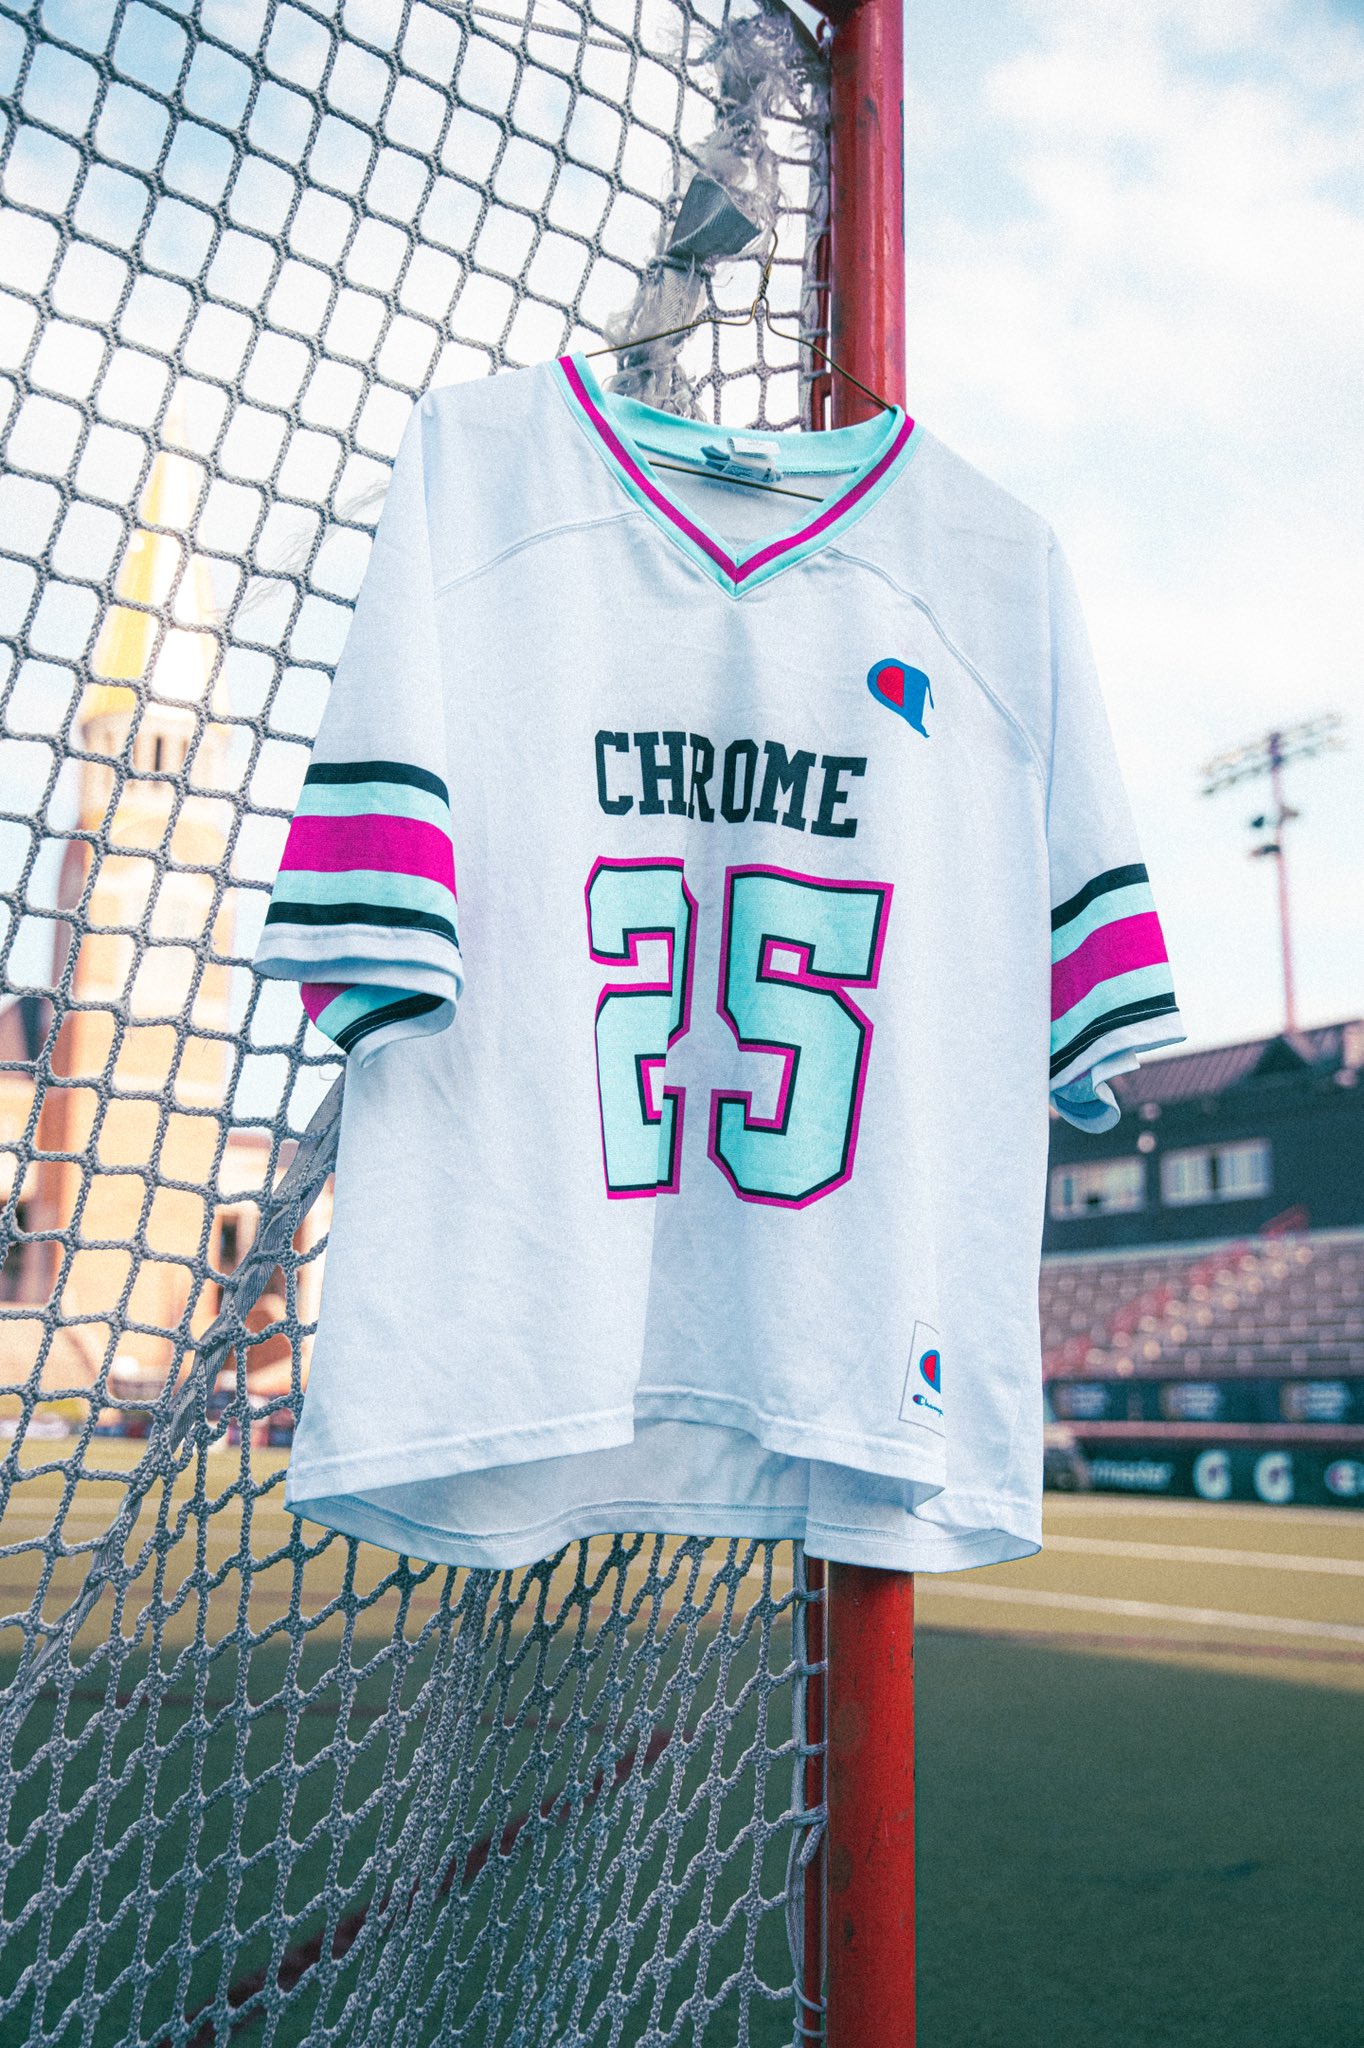 Chrome Lacrosse Club on X: You can get your own vintage icy white